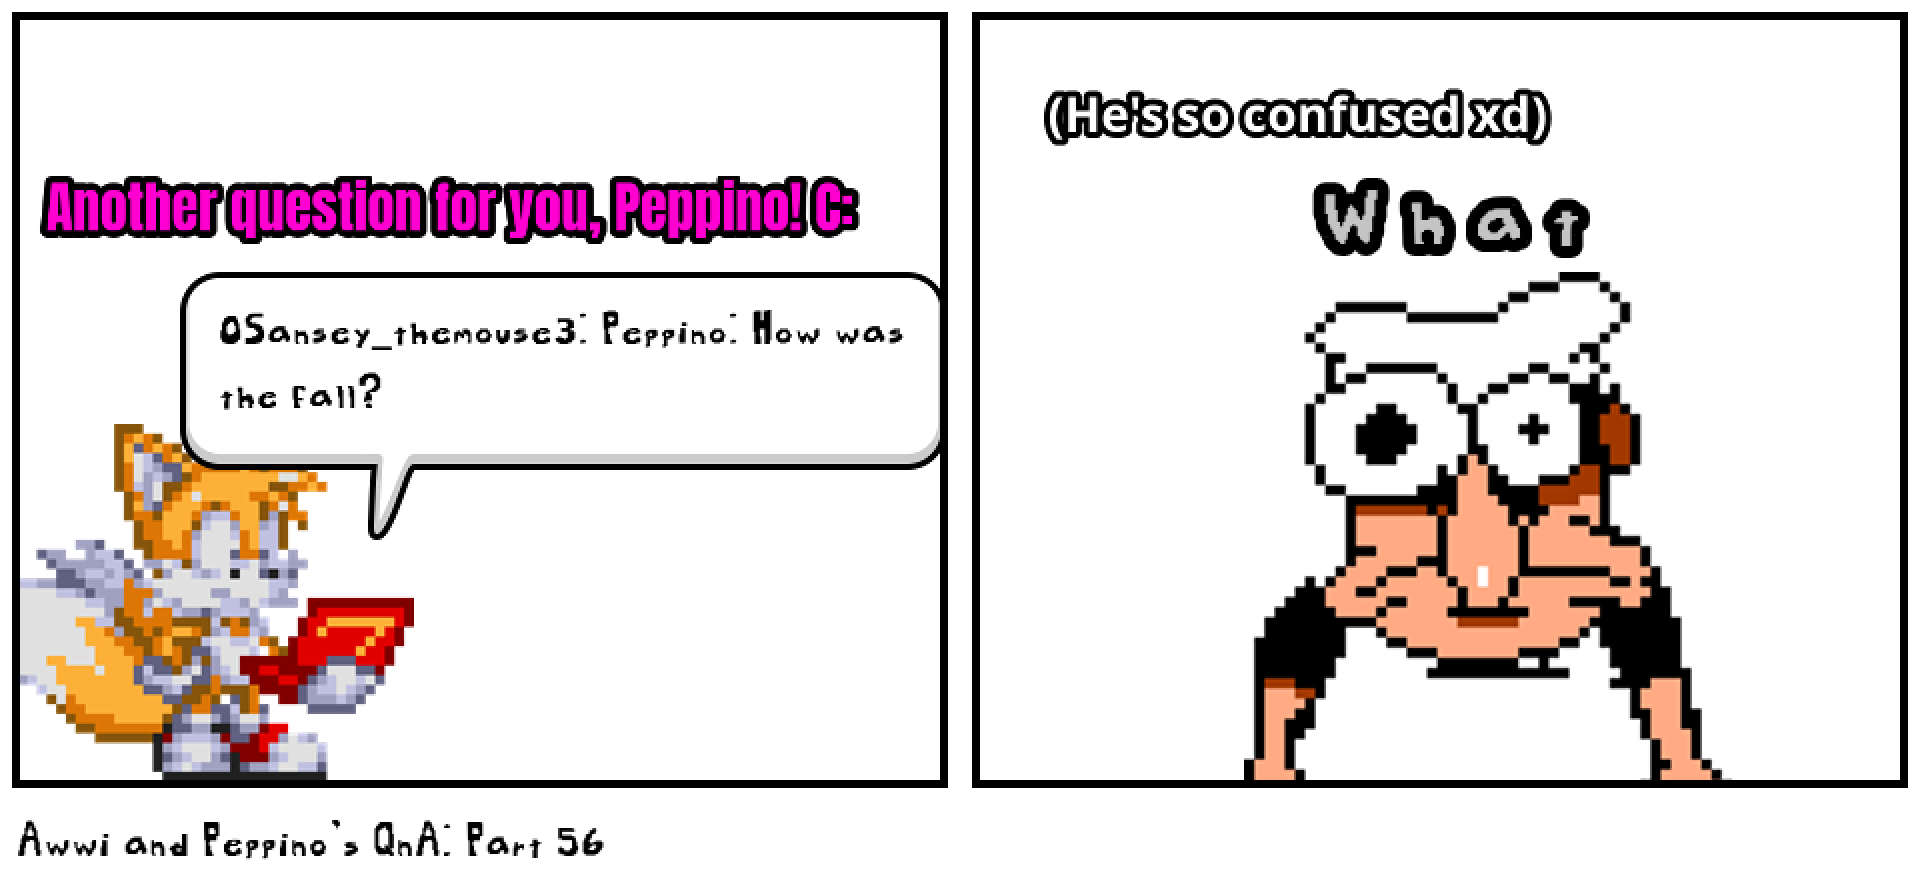 Awwi and Peppino's QnA: Part 56